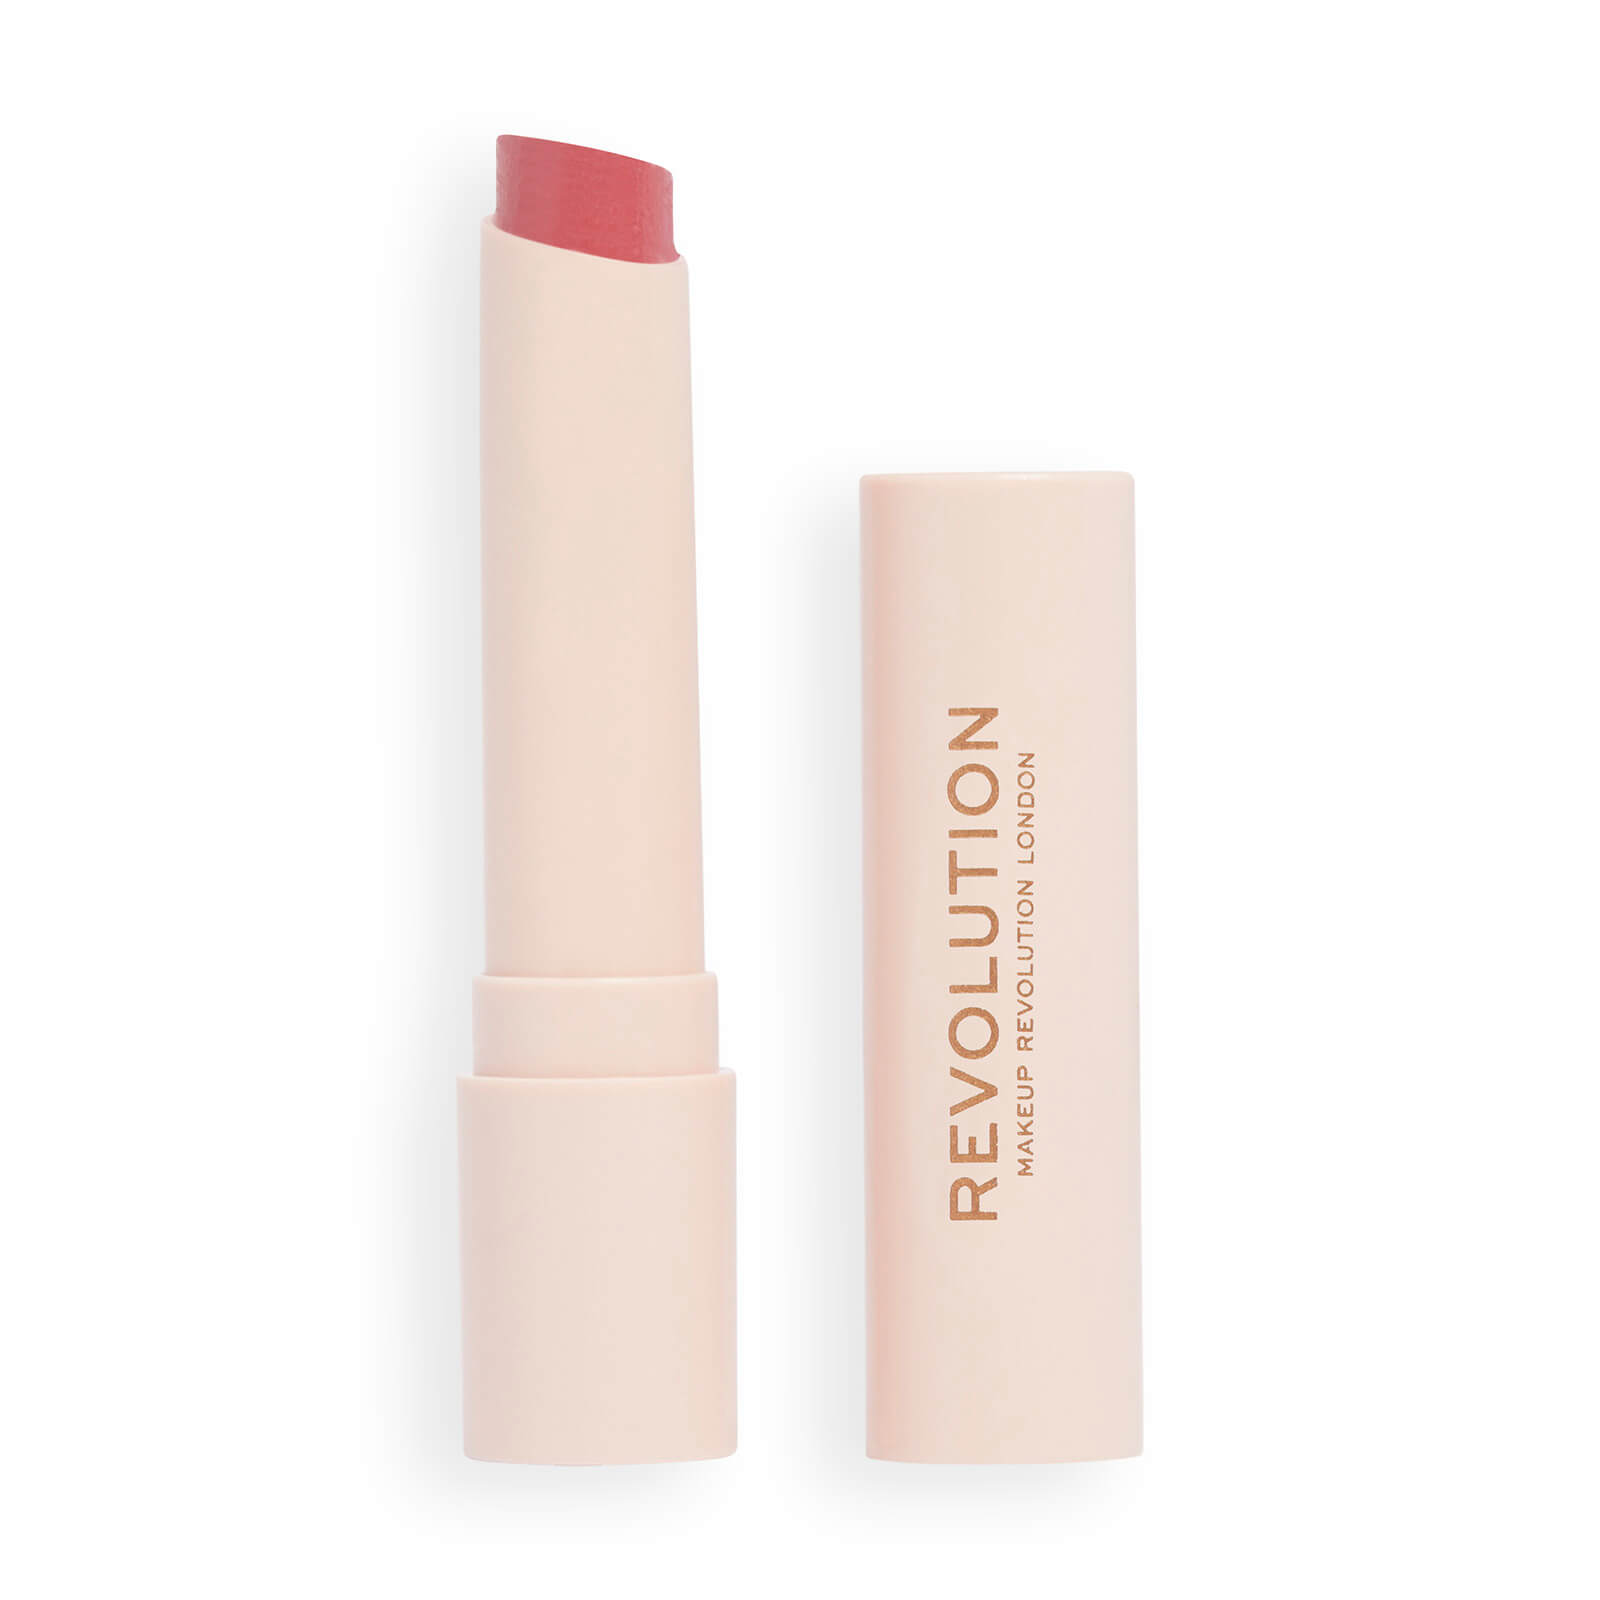 Image of Revolution Beauty Revolution Pout Balm (Various Shades) - Rose Shine